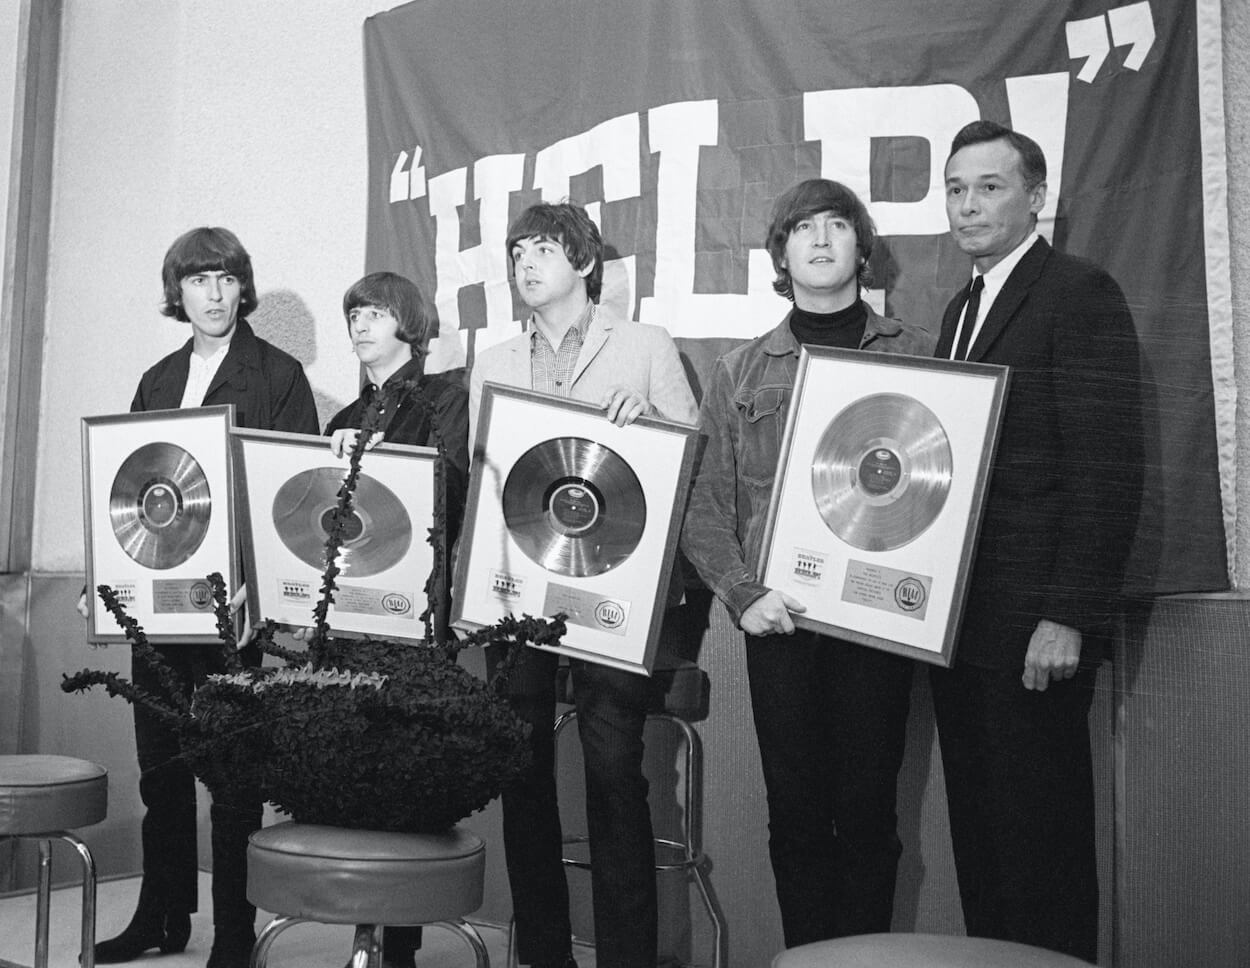 Beatles members George Harrison (from left), Ringo Starr, Paul McCartney, and John Lennon display gold records while promoting the movie 'Help!' in 1965.